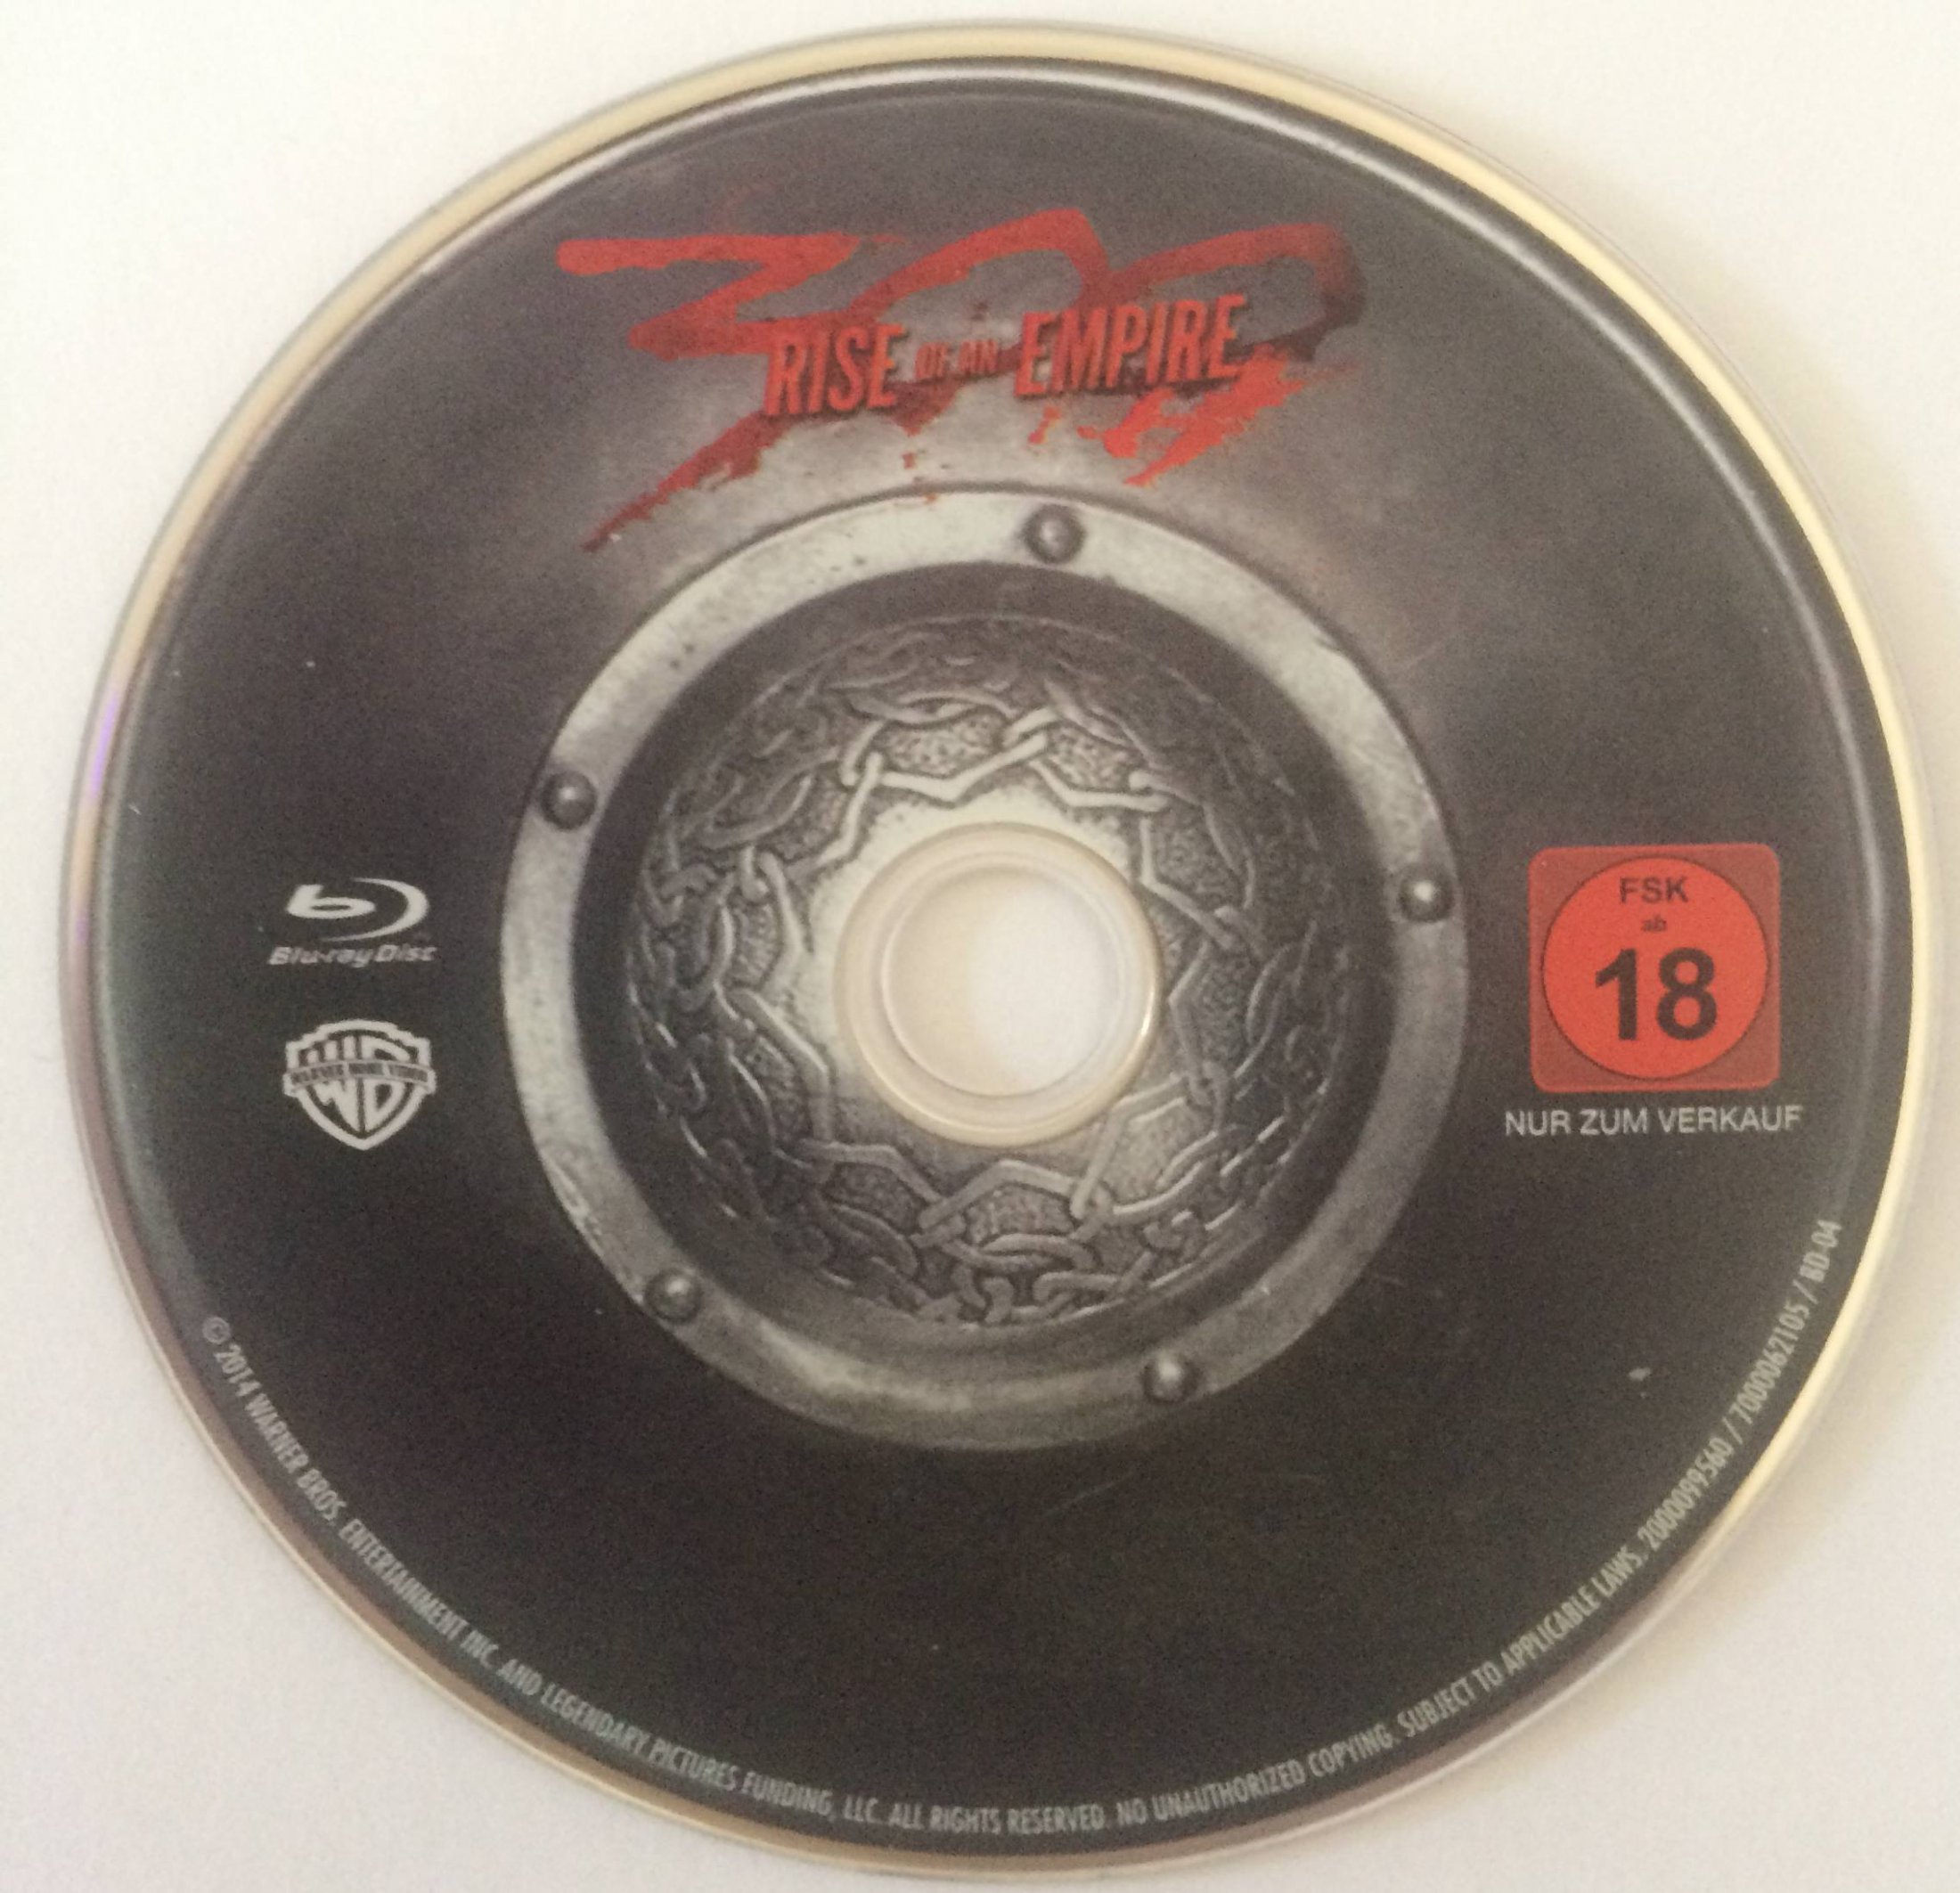 300 - Rise of an Empire Disk